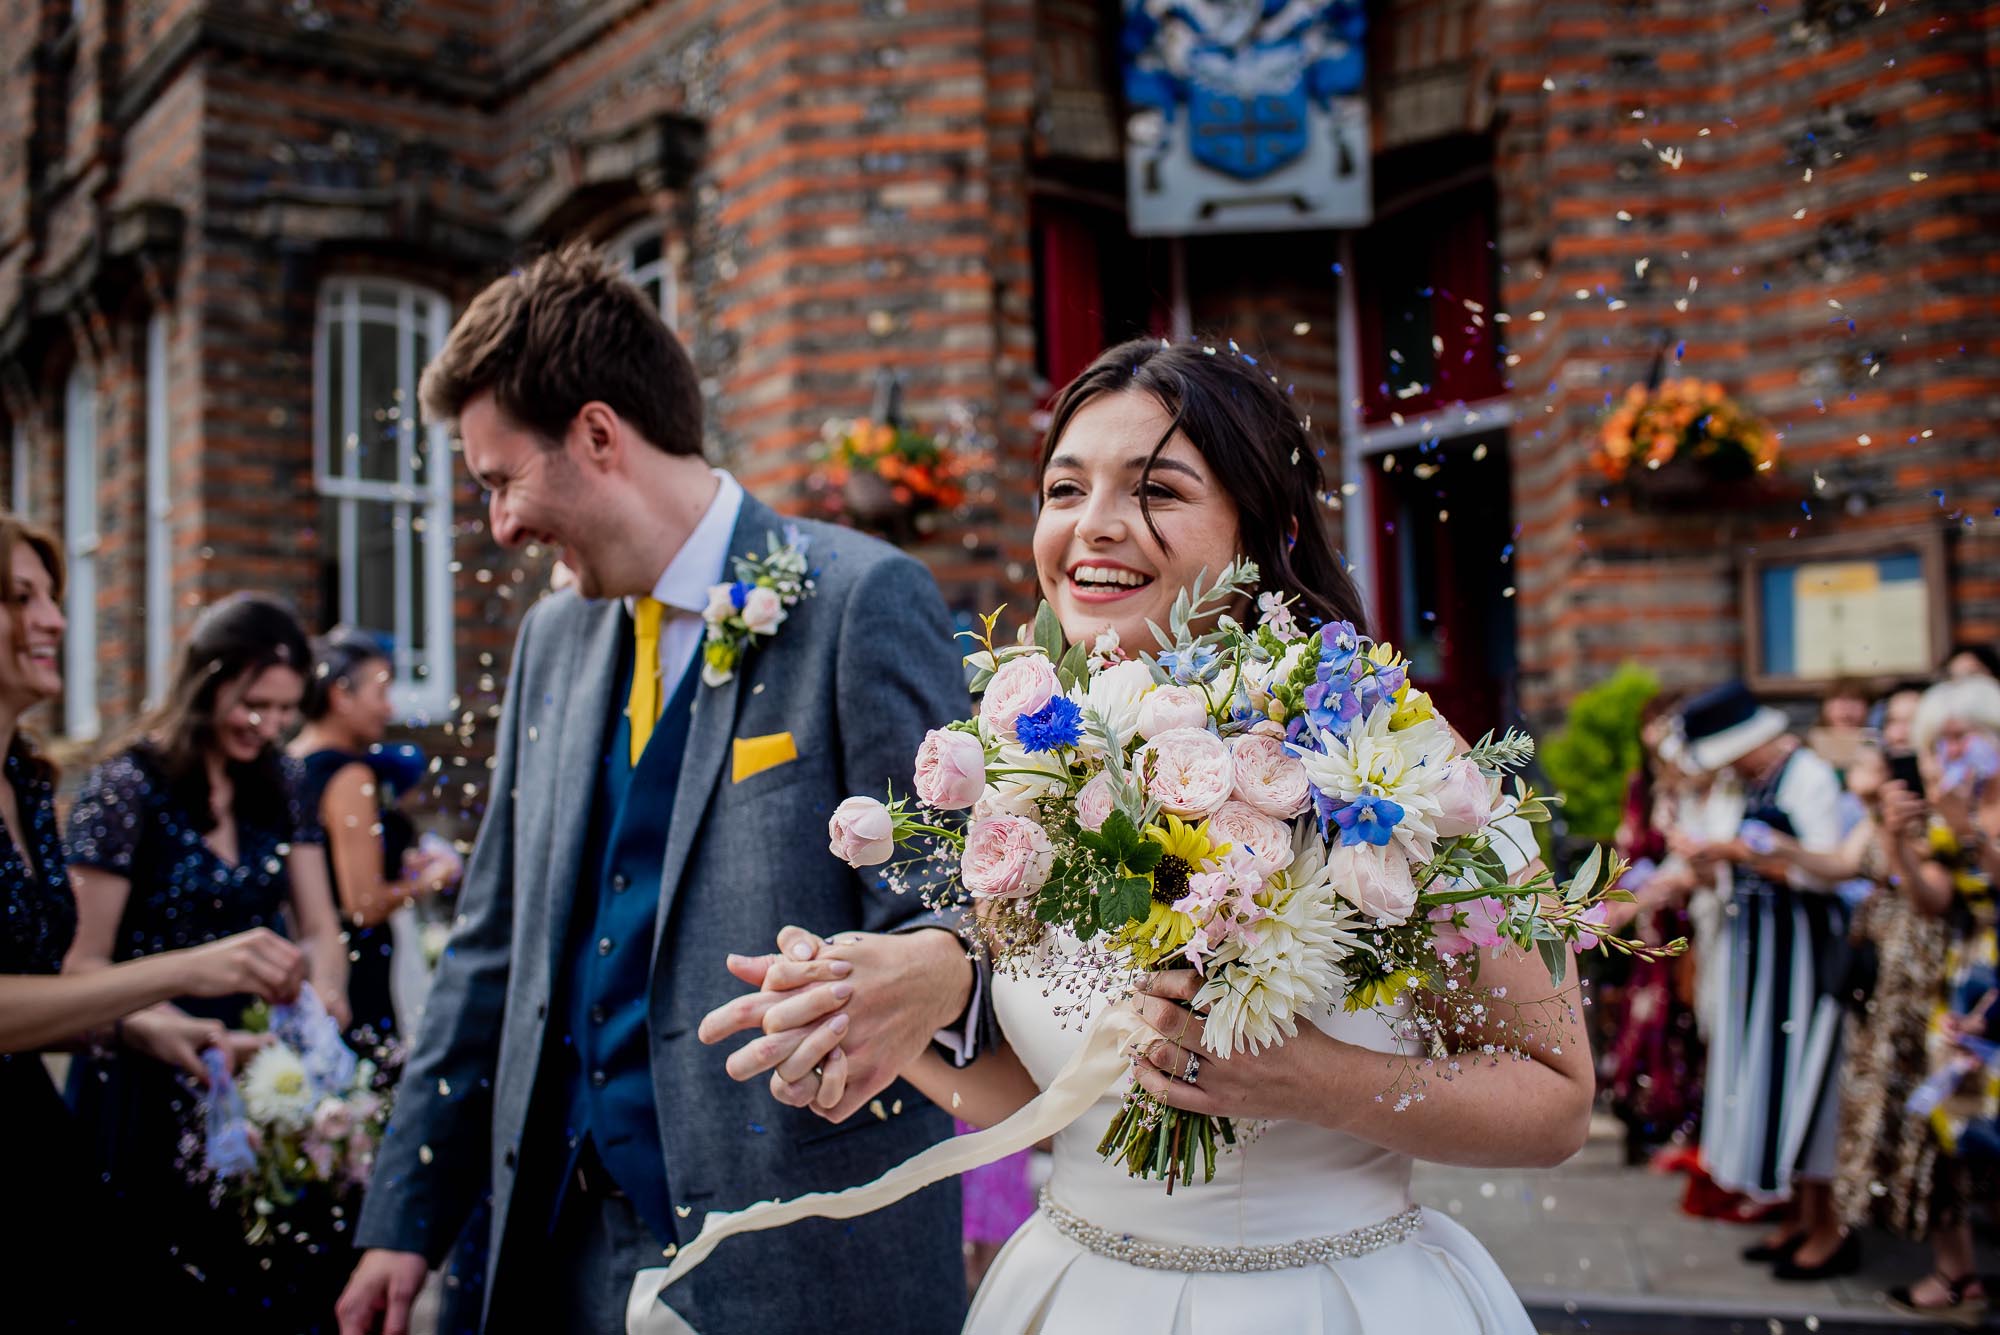 Nicola & George’s creative DIY wedding at home, with Damien Vickers Photography